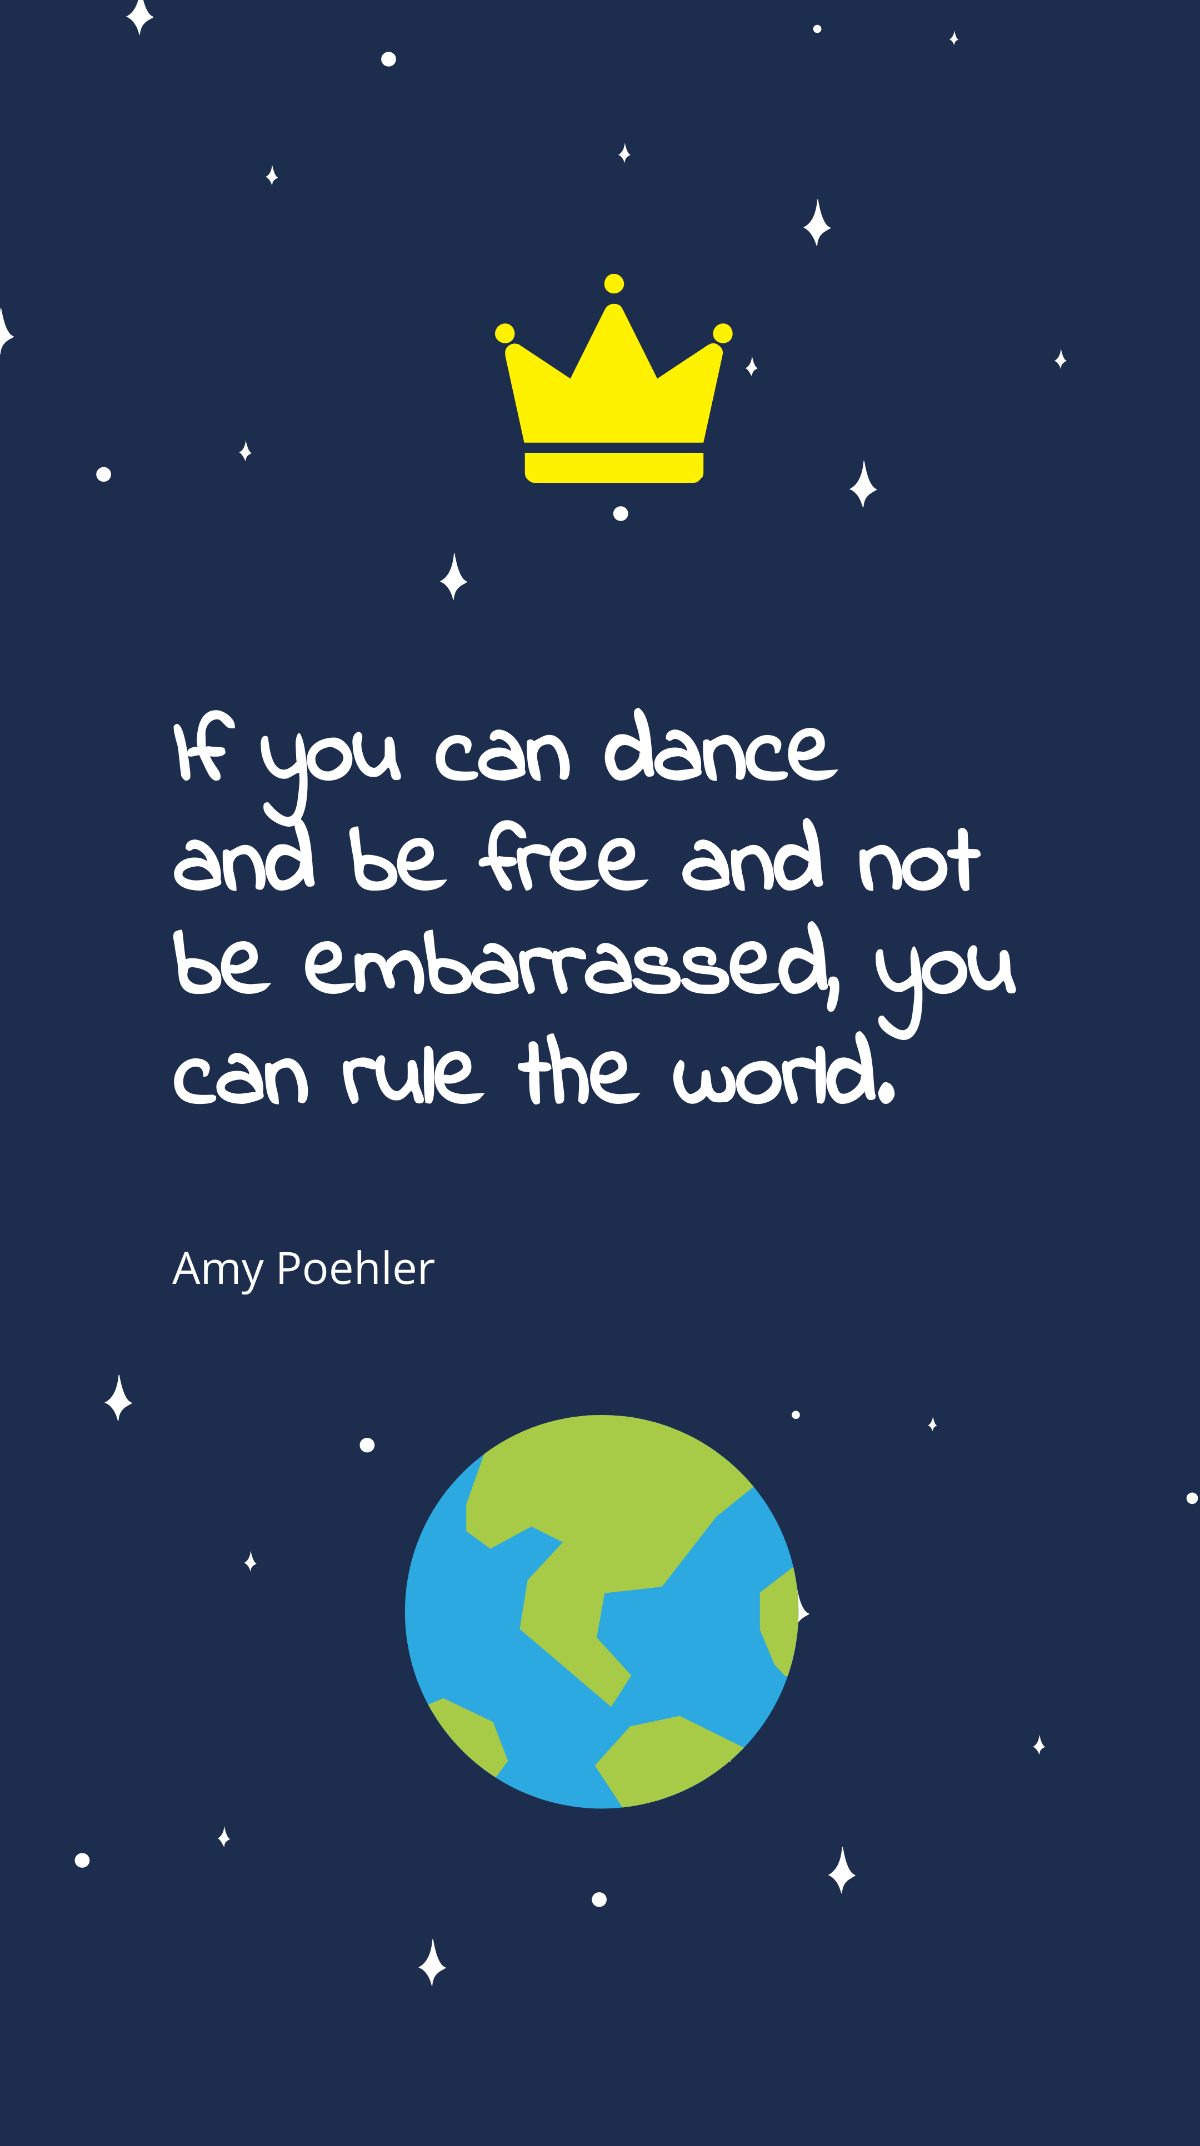 Amy Poehler - If you can dance and be and not be embarrassed, you can rule the world. Template